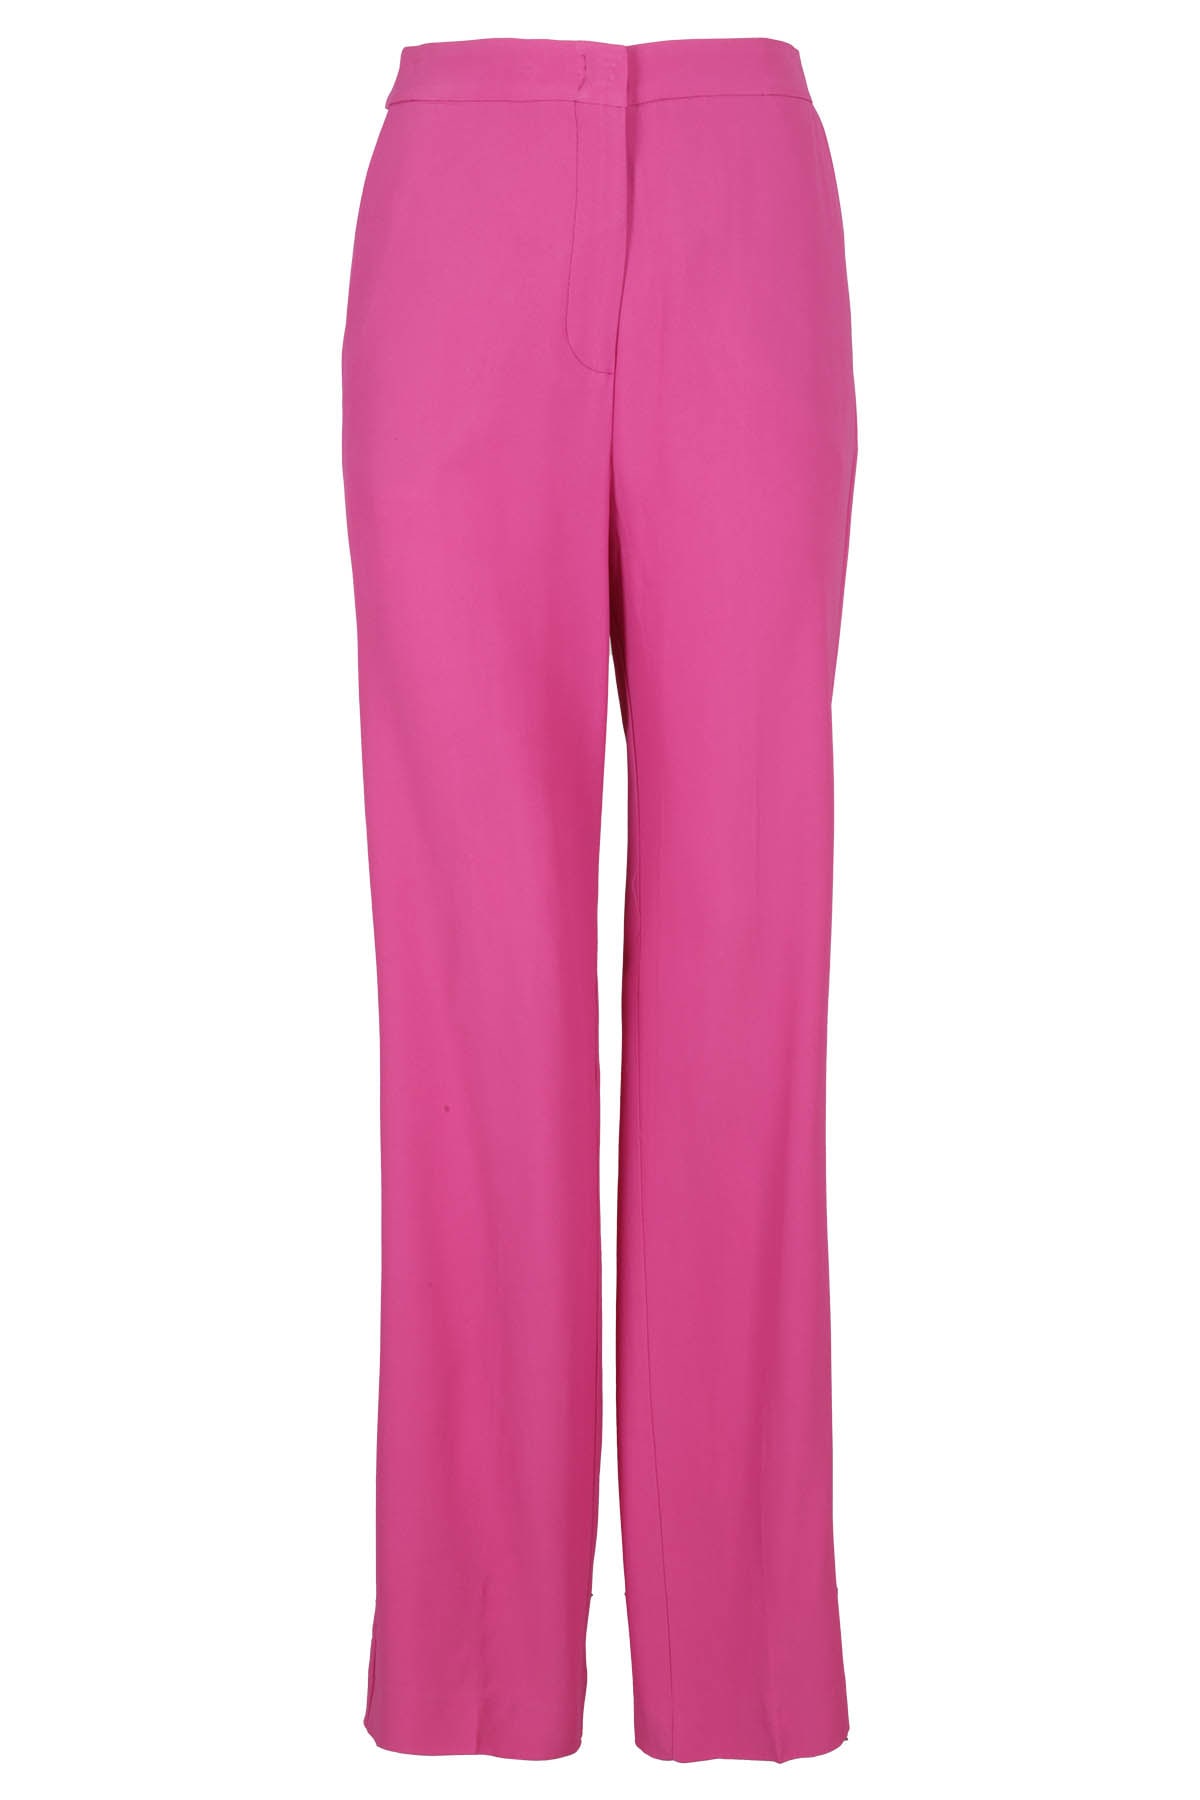 Federica Tosi Pants In Buganville